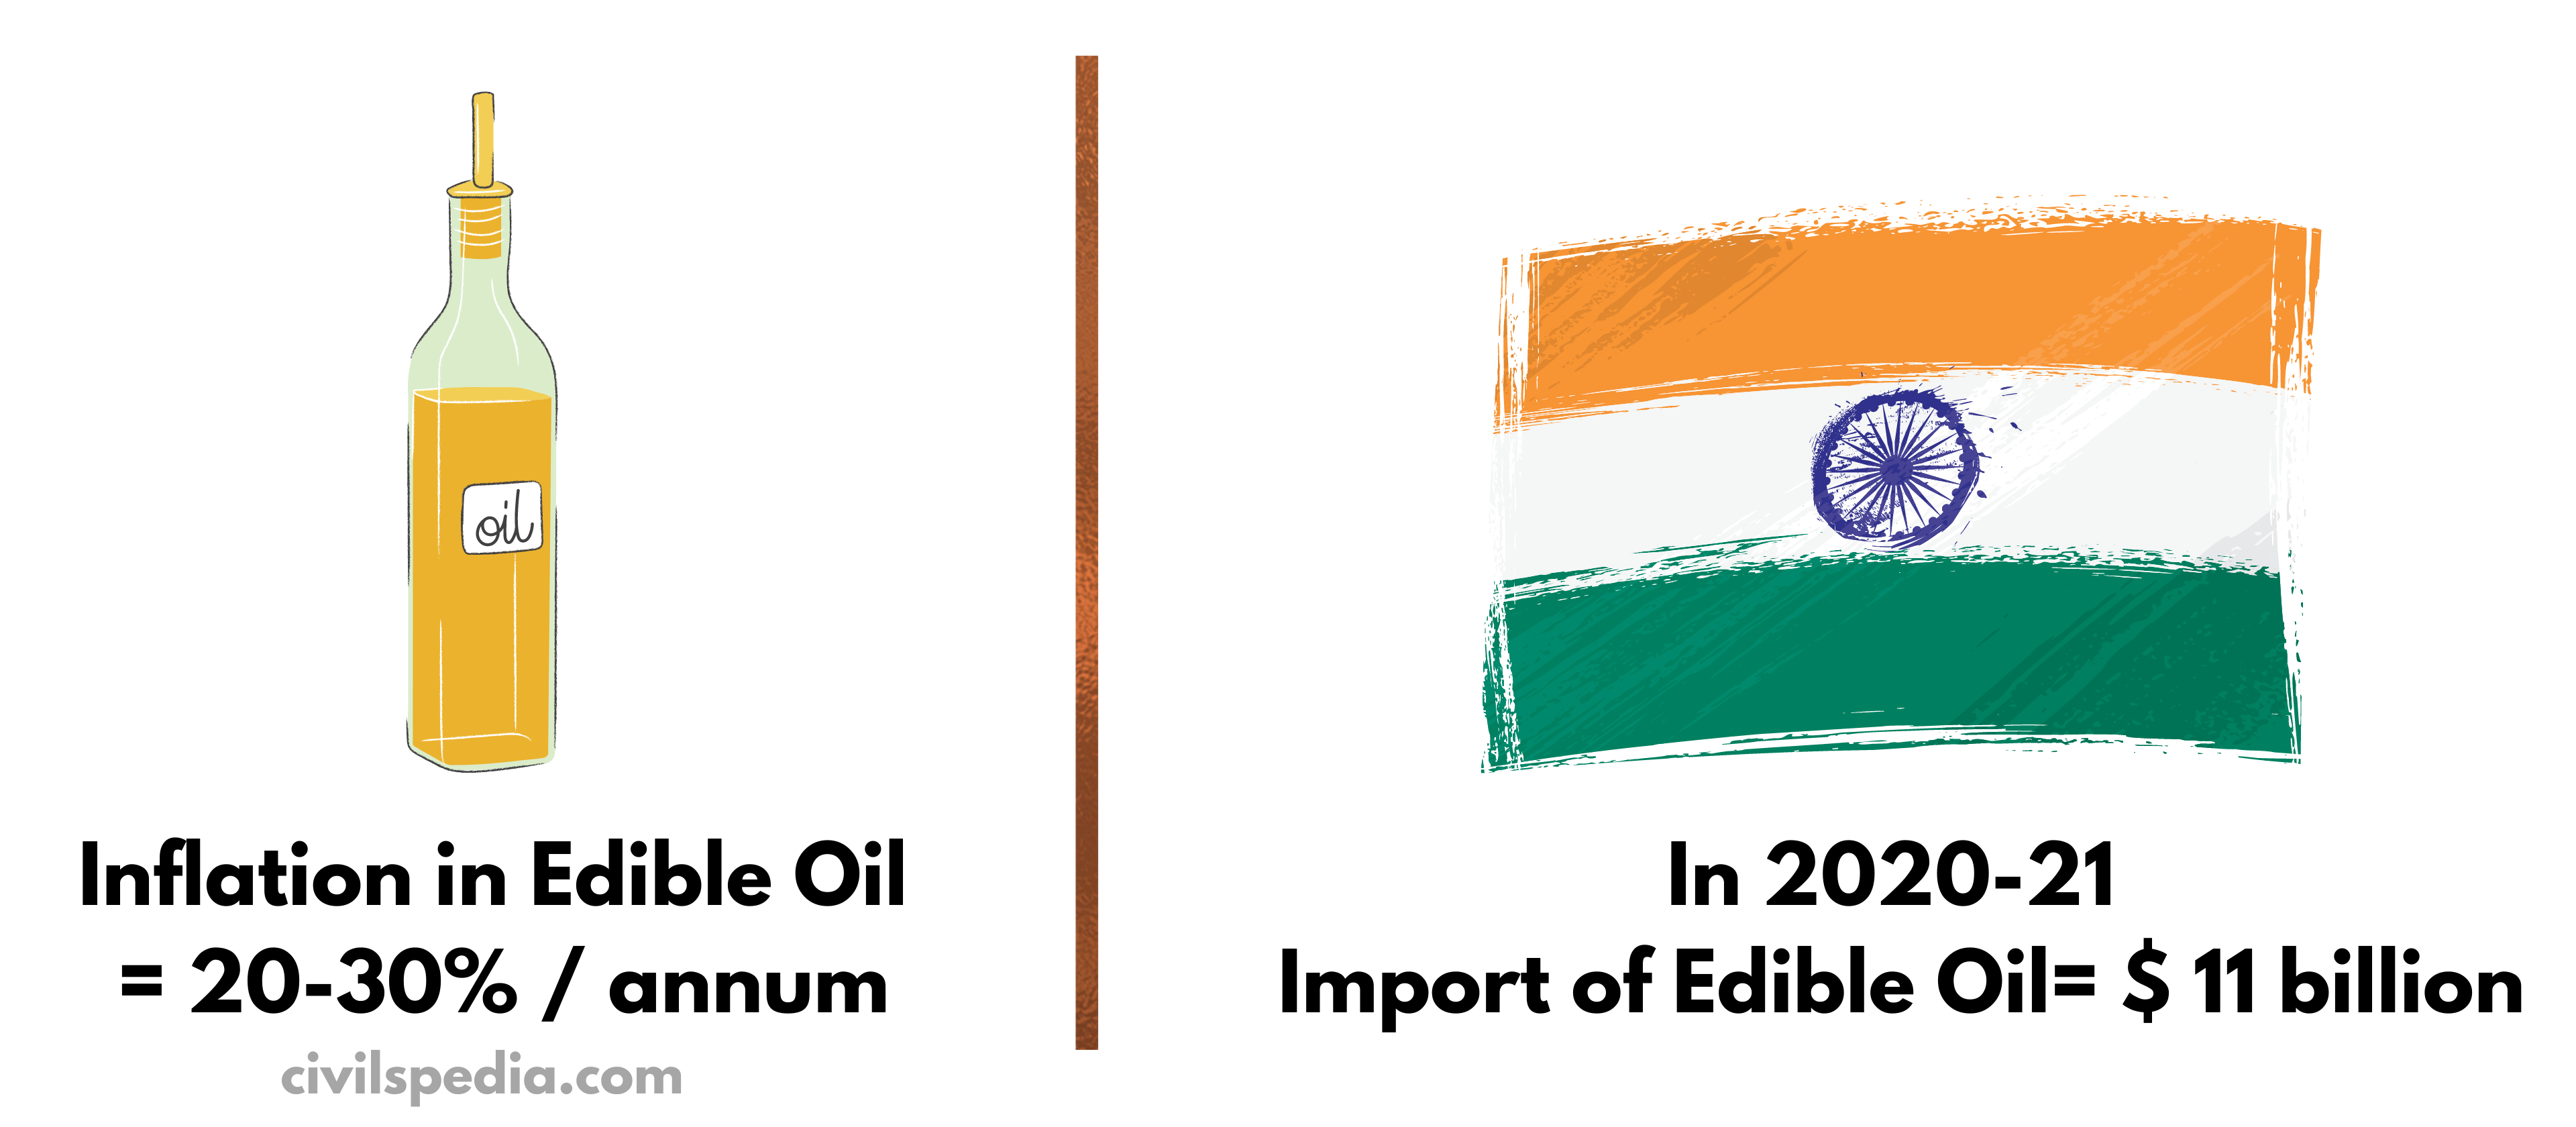 Inflation of Edible Oil